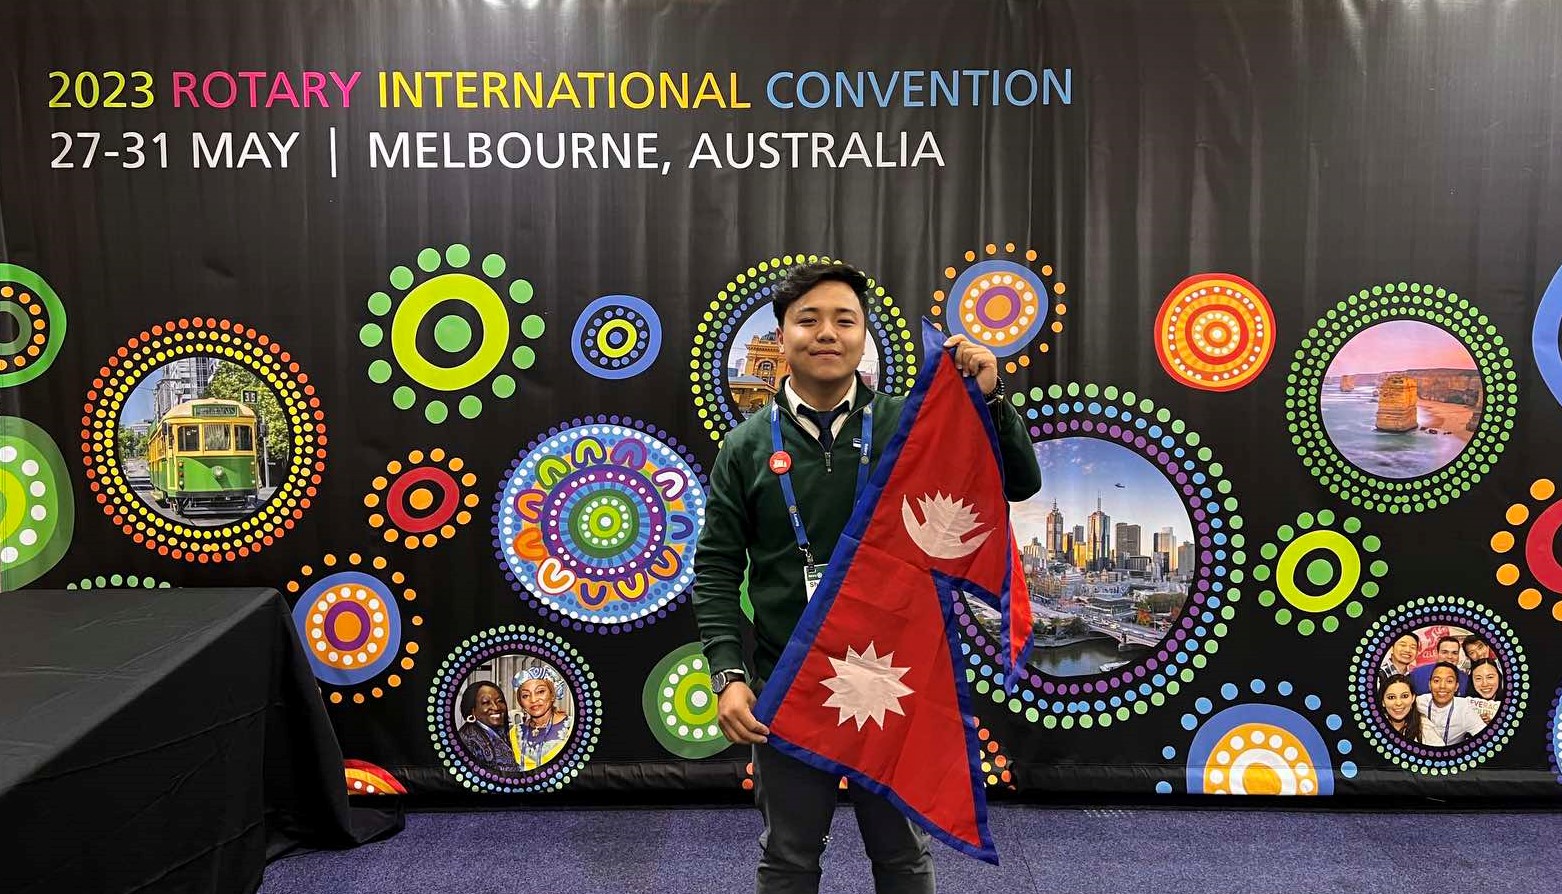 Attended Rotary International Convention at Melbourne, 2023 by Rtn. Pasang Lama, representing RC Boudha.